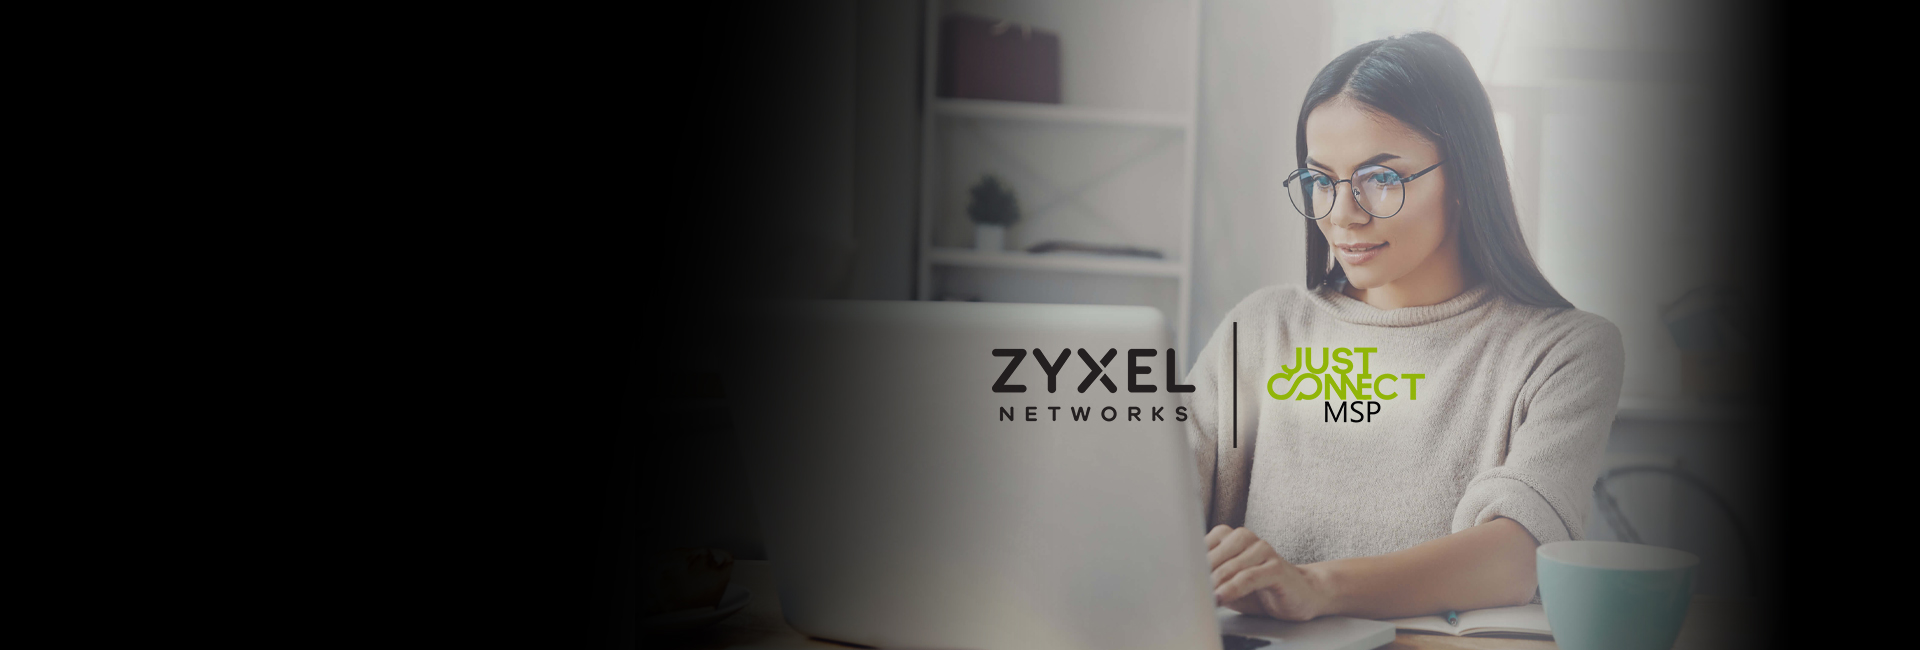 Zyxel Just Connect MSP